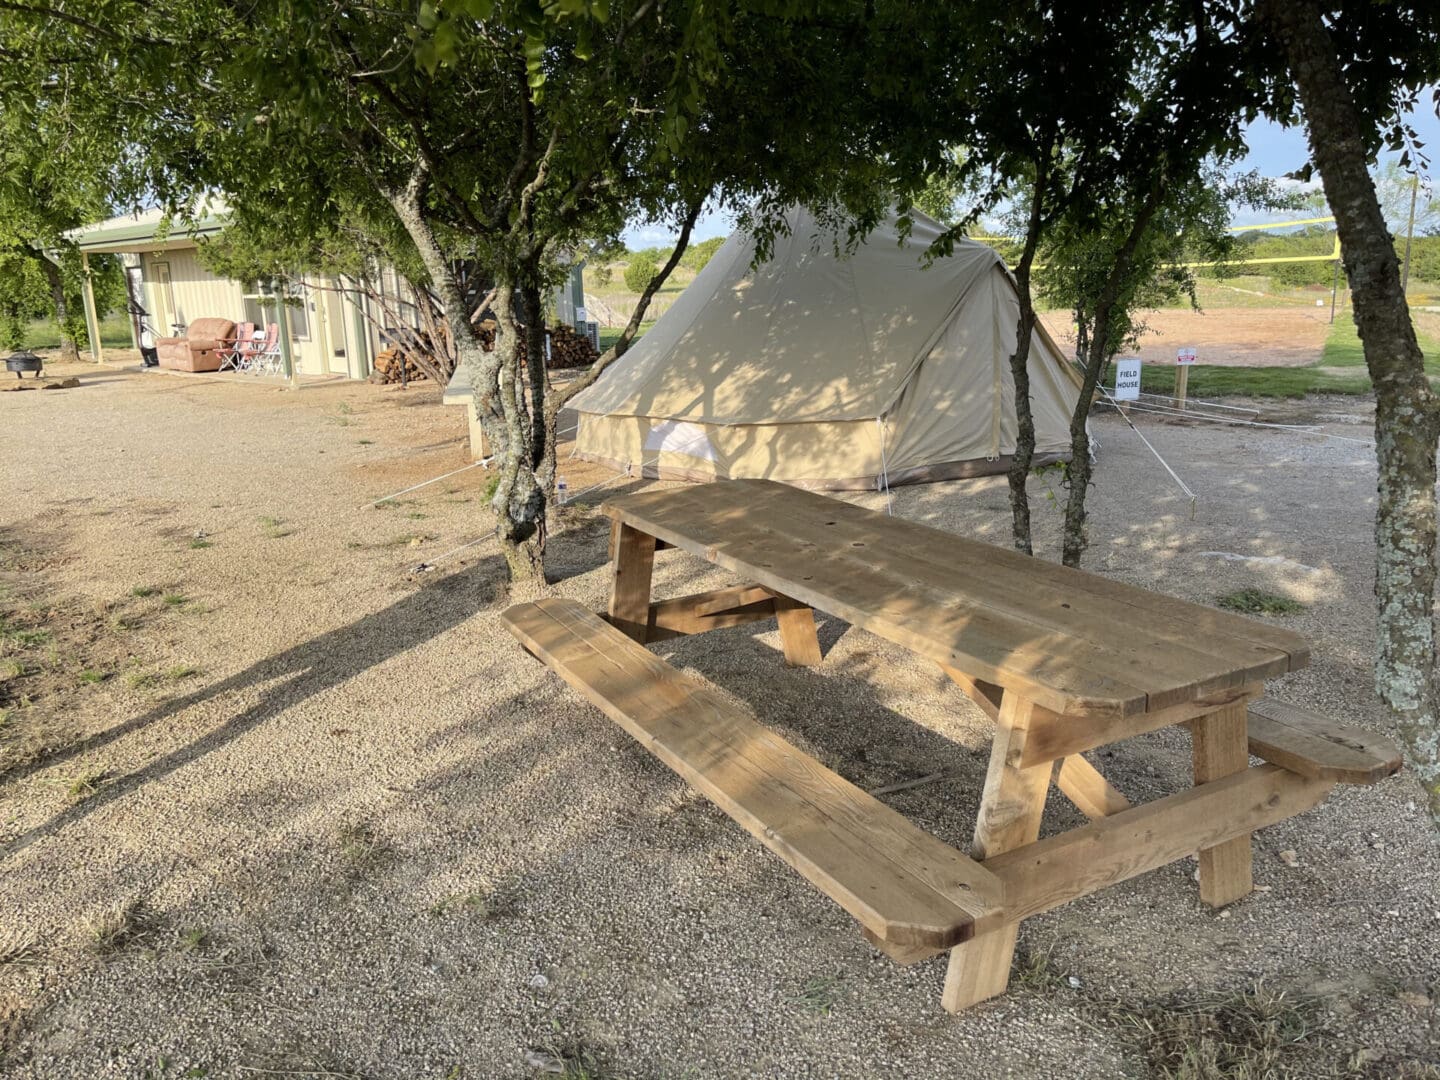 A wooden picnic table near the tent